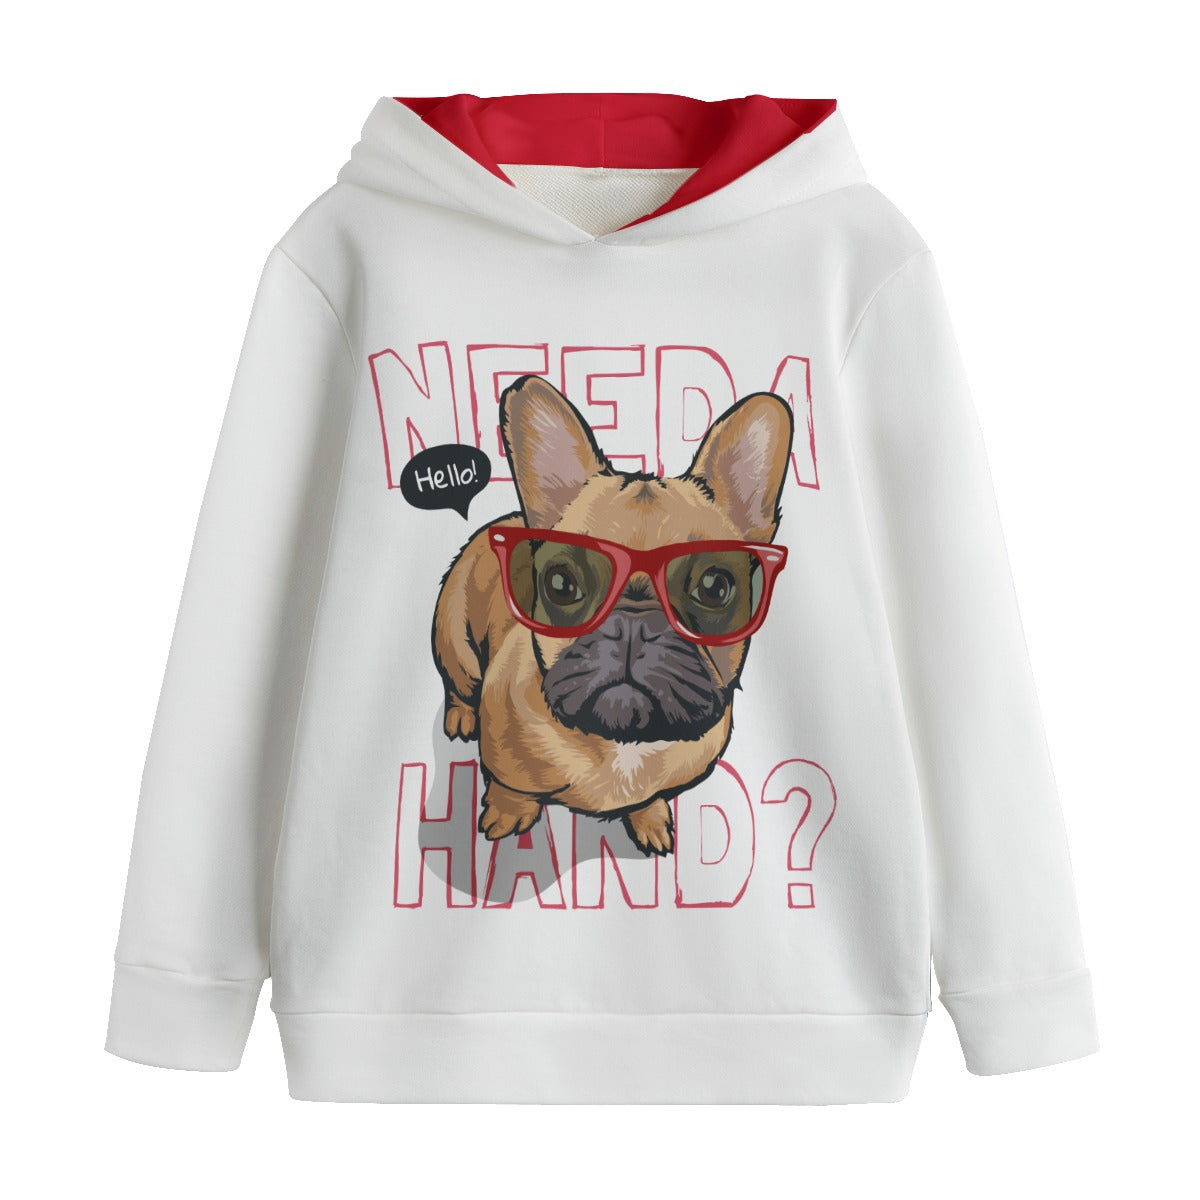 Luna - All-Over Print Kid's Pullover Hoodie